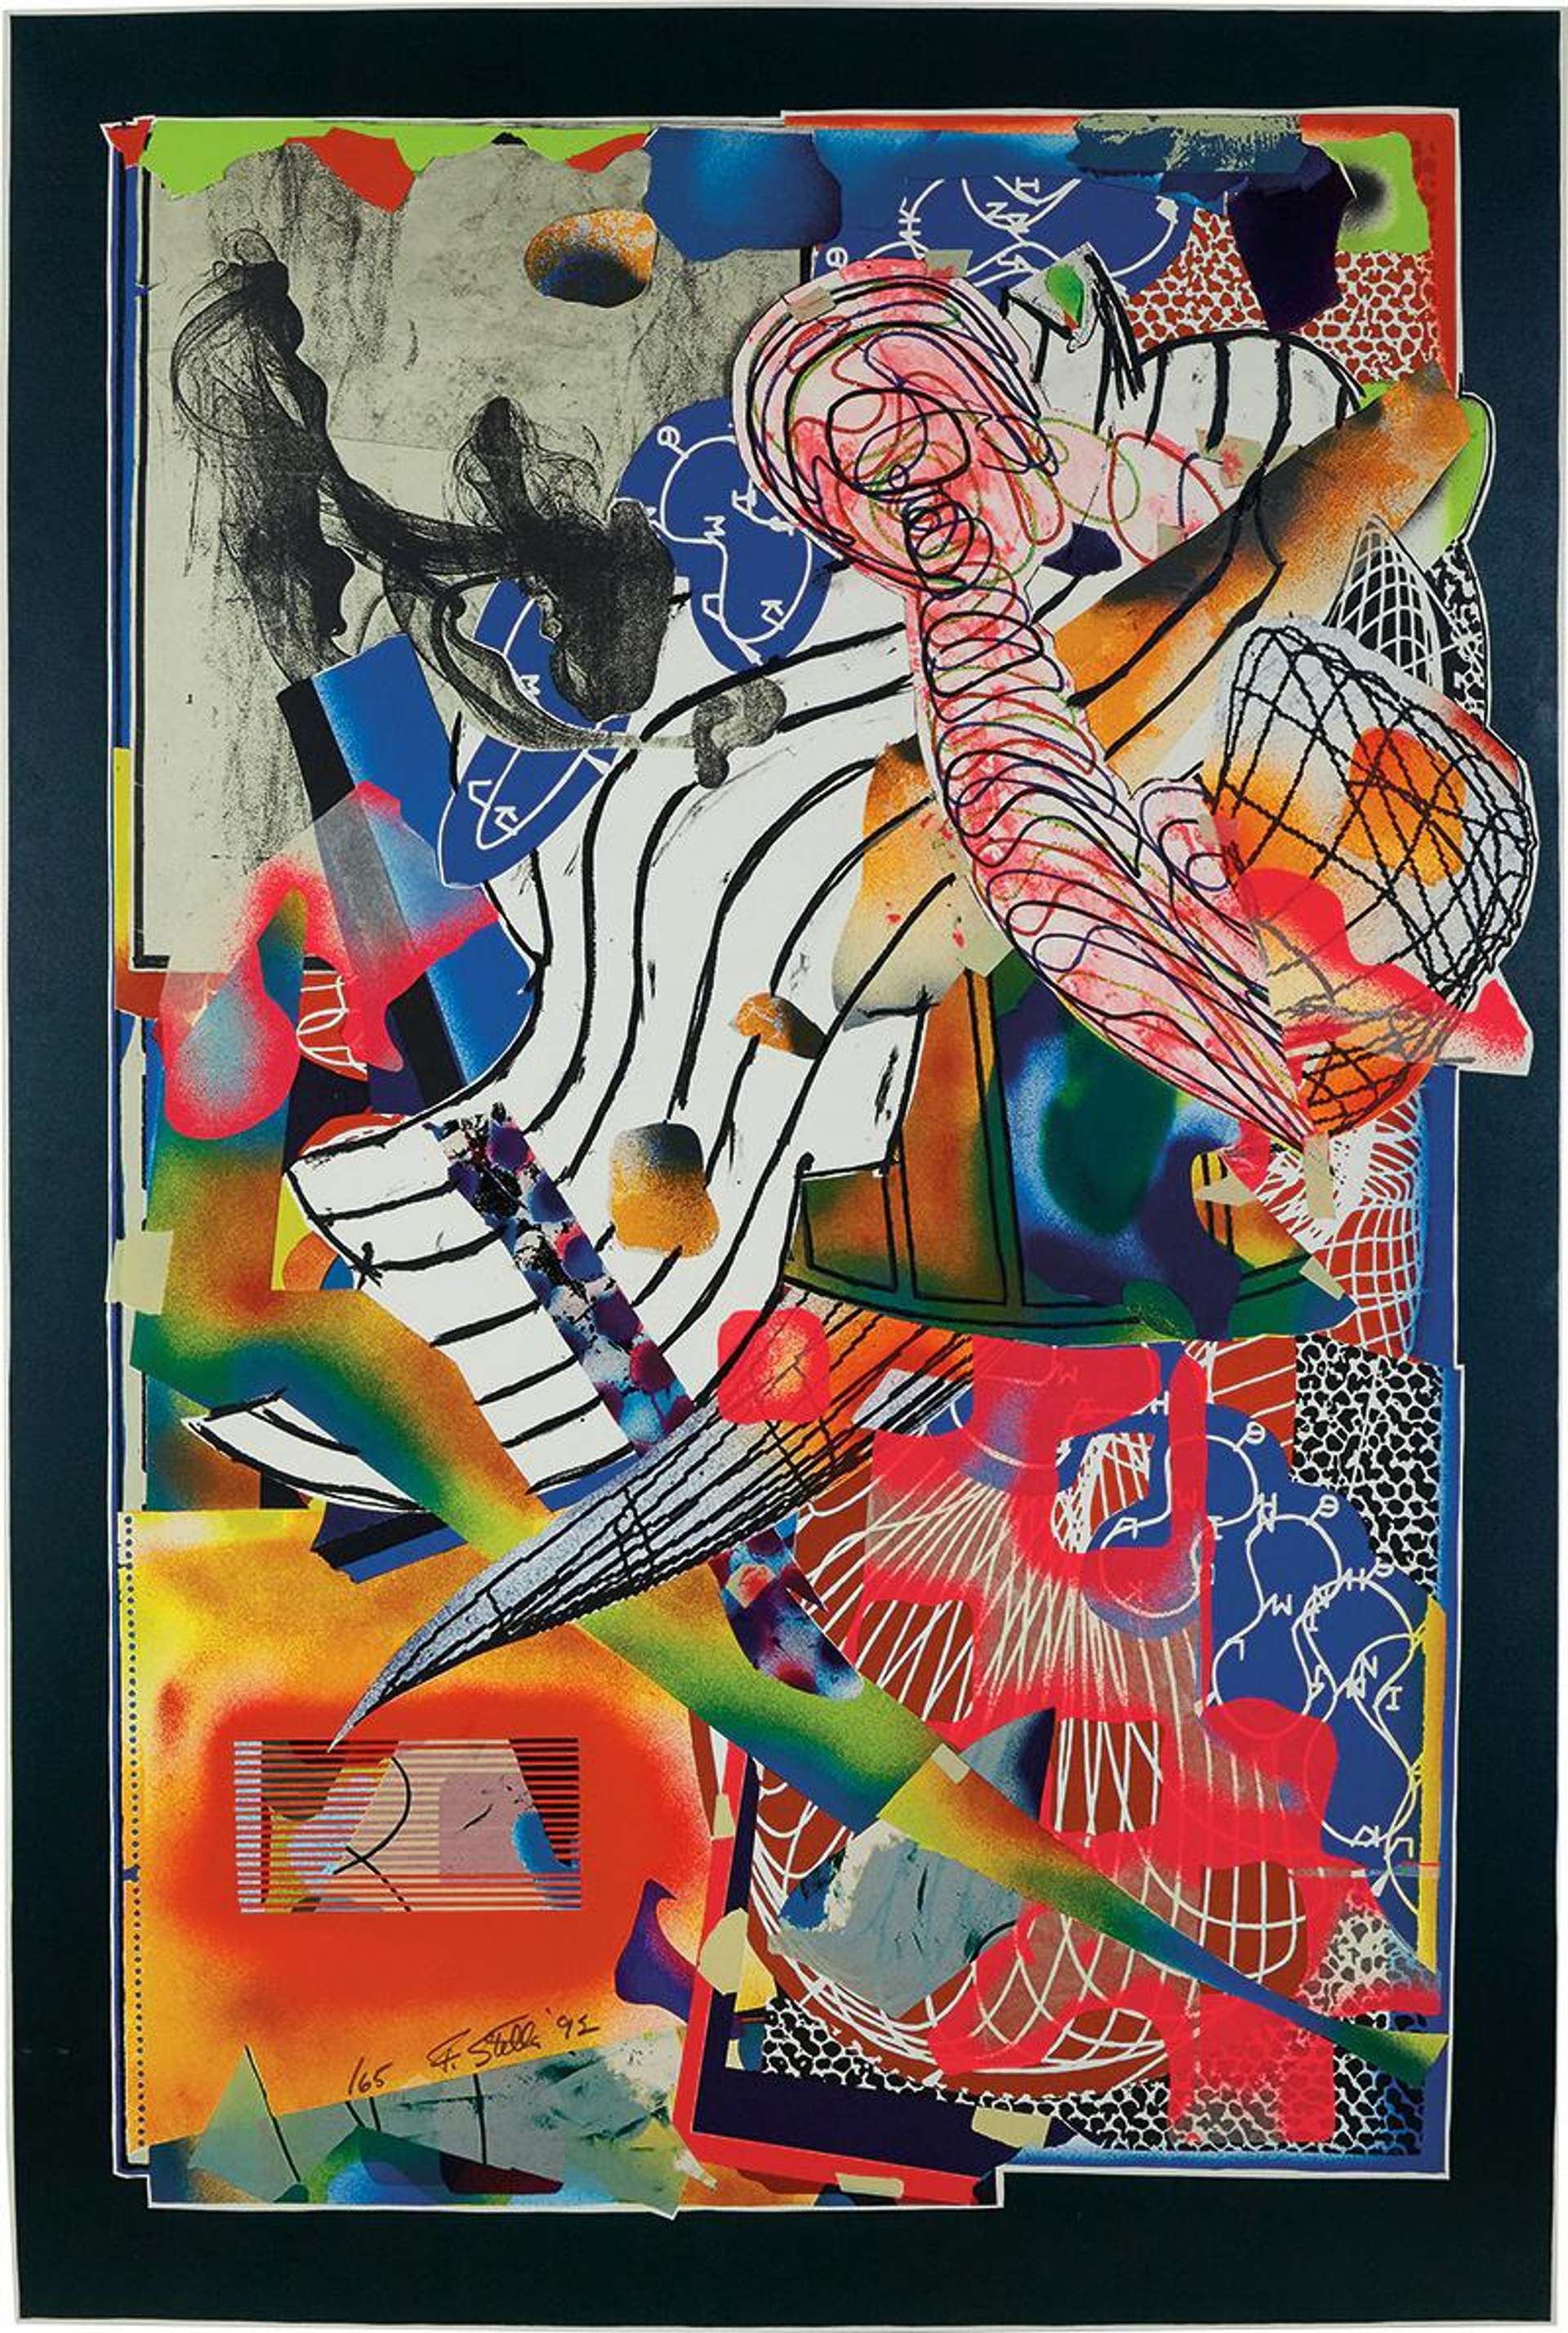 Frank Stella: The Candles - Signed Print